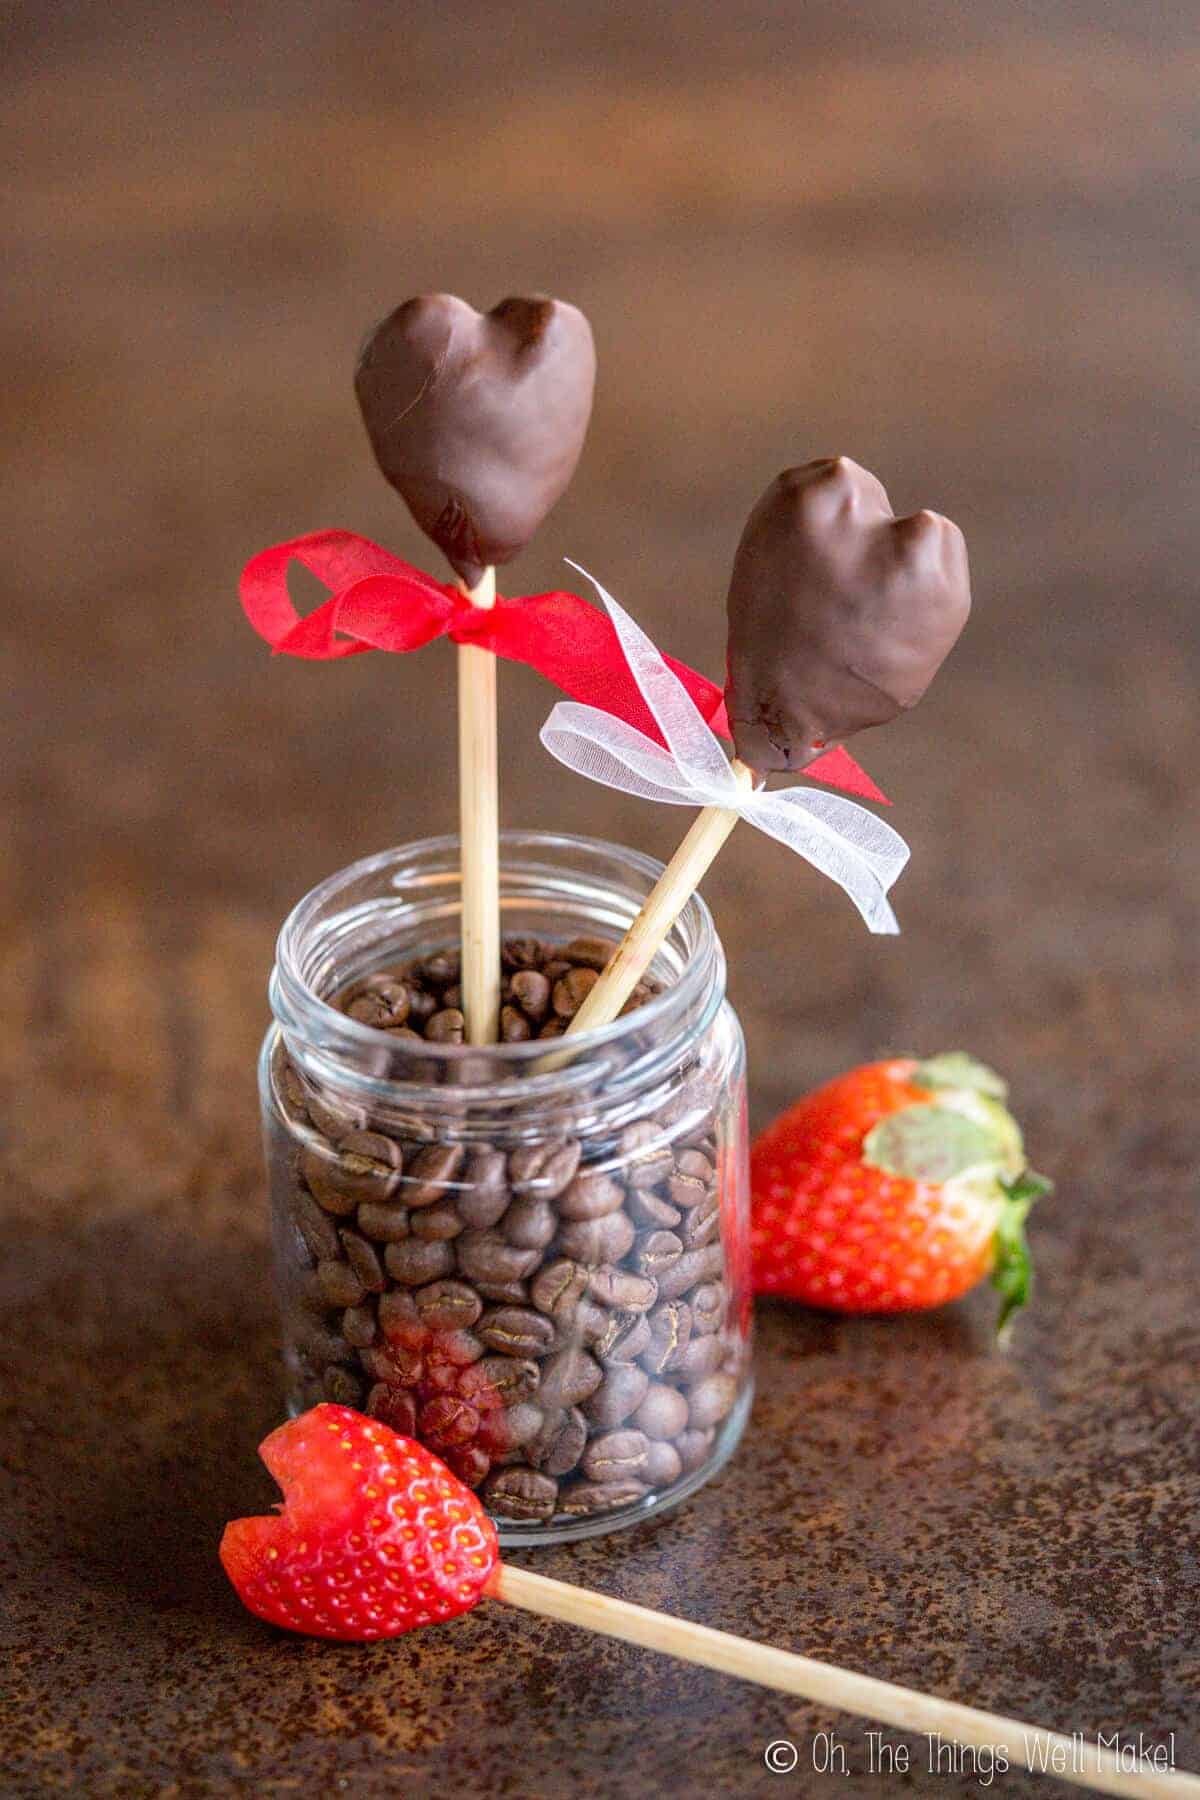 Two chocolate covered strawberries in a heart shape and next to a heart shaped strawberry on a stick ready to be dipped in chocolate.